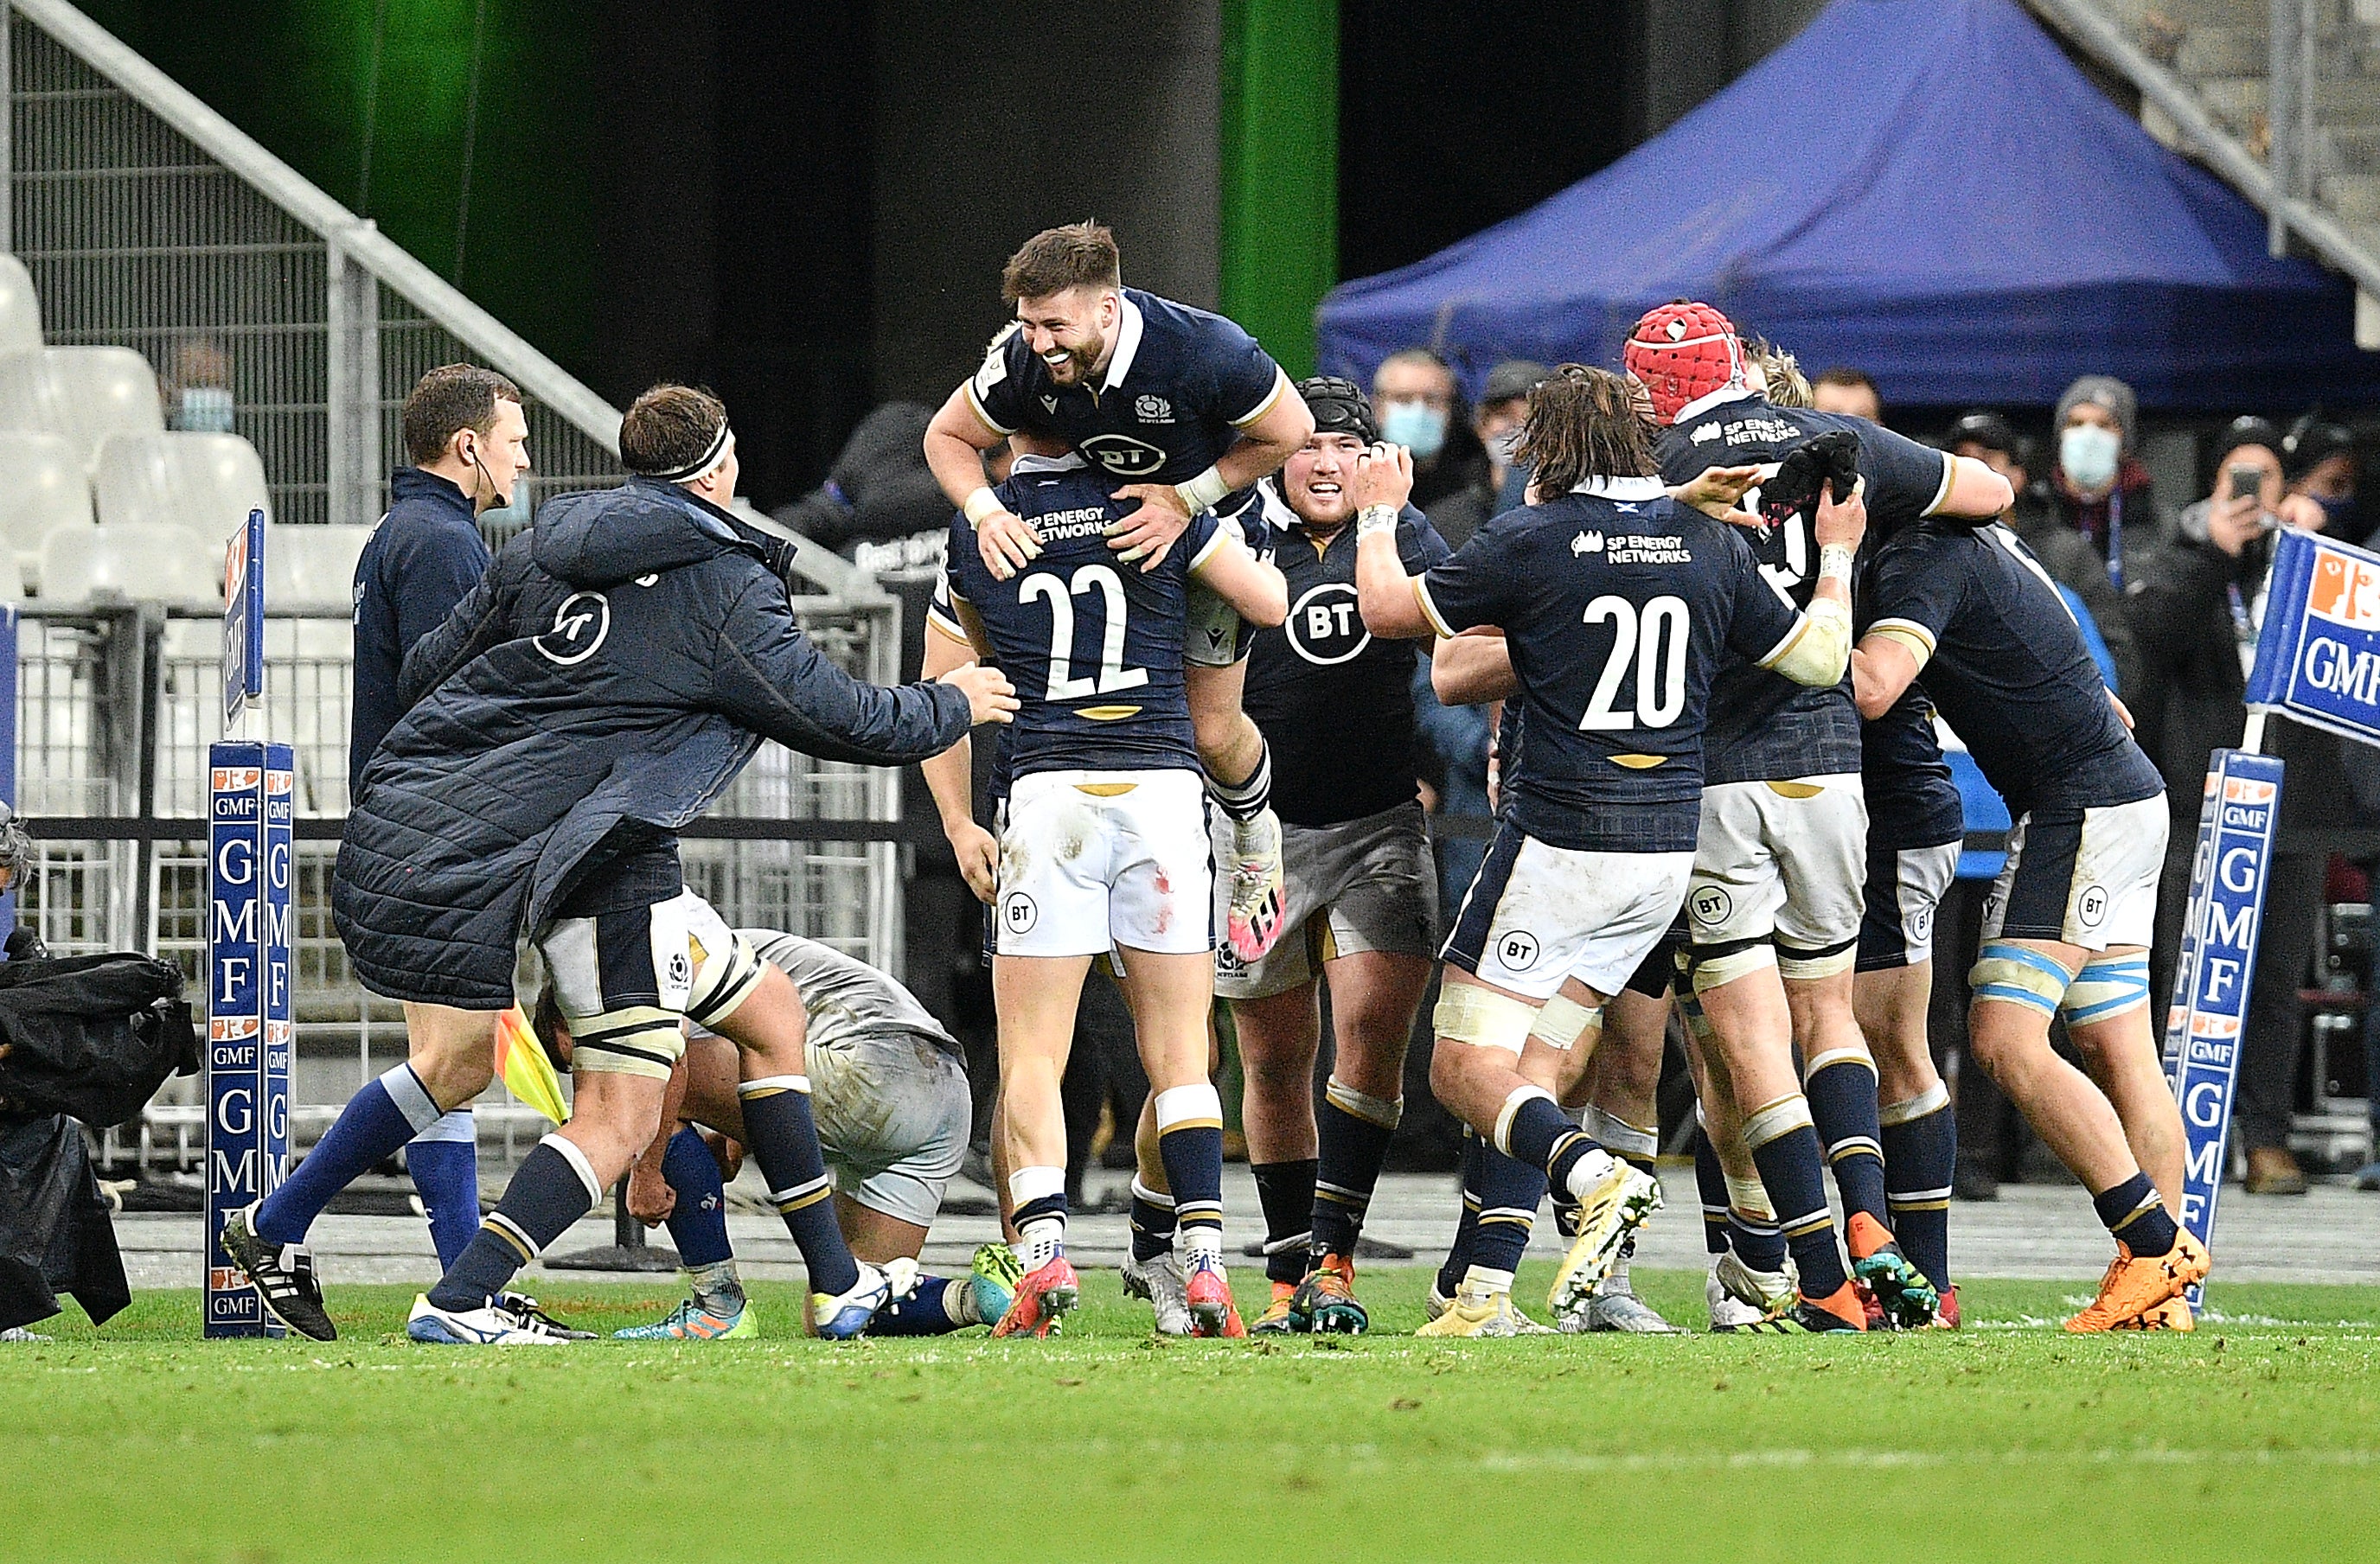 The Scots have enjoyed some big victories this year, including in Paris in March. (ABACA/PA)